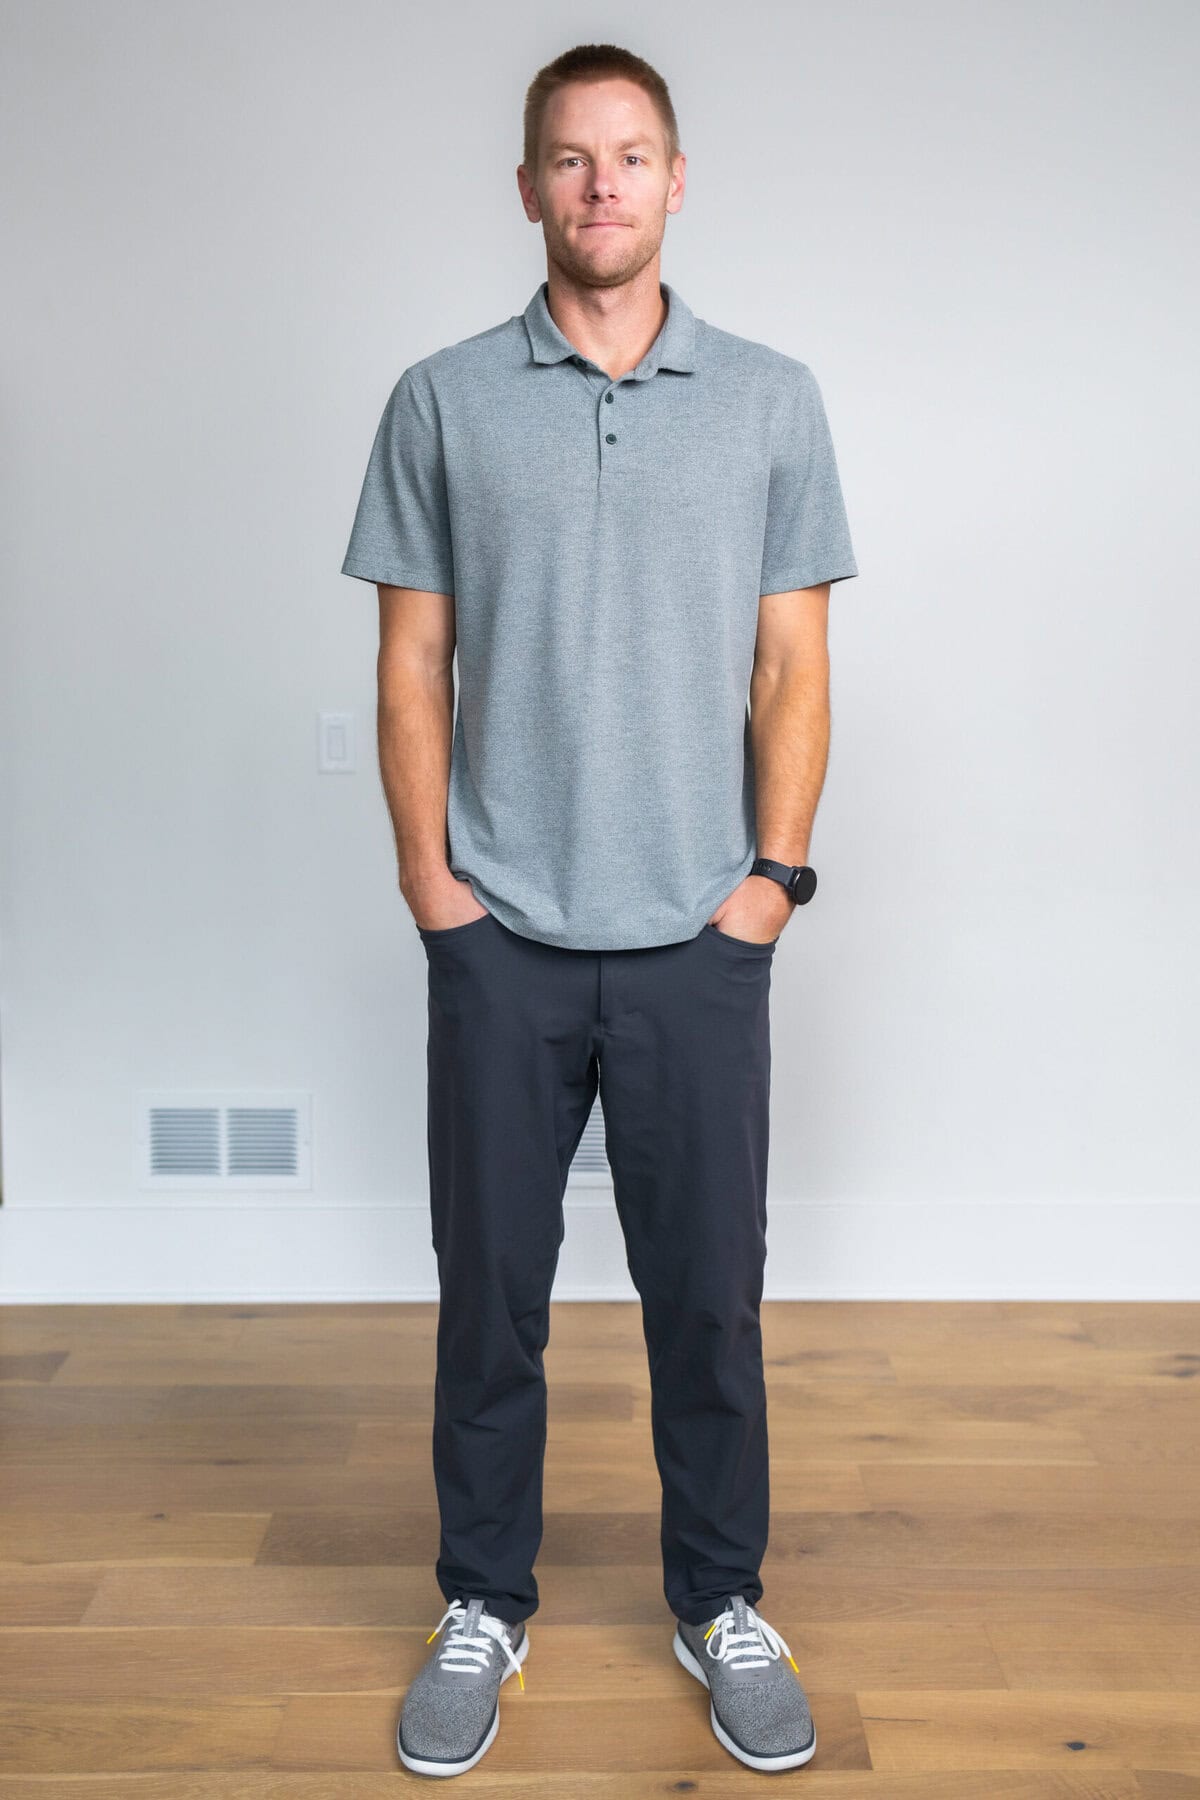 Man wearing Metal Vent Tech Polo from lululemon as part of best lululemon men's gear product review